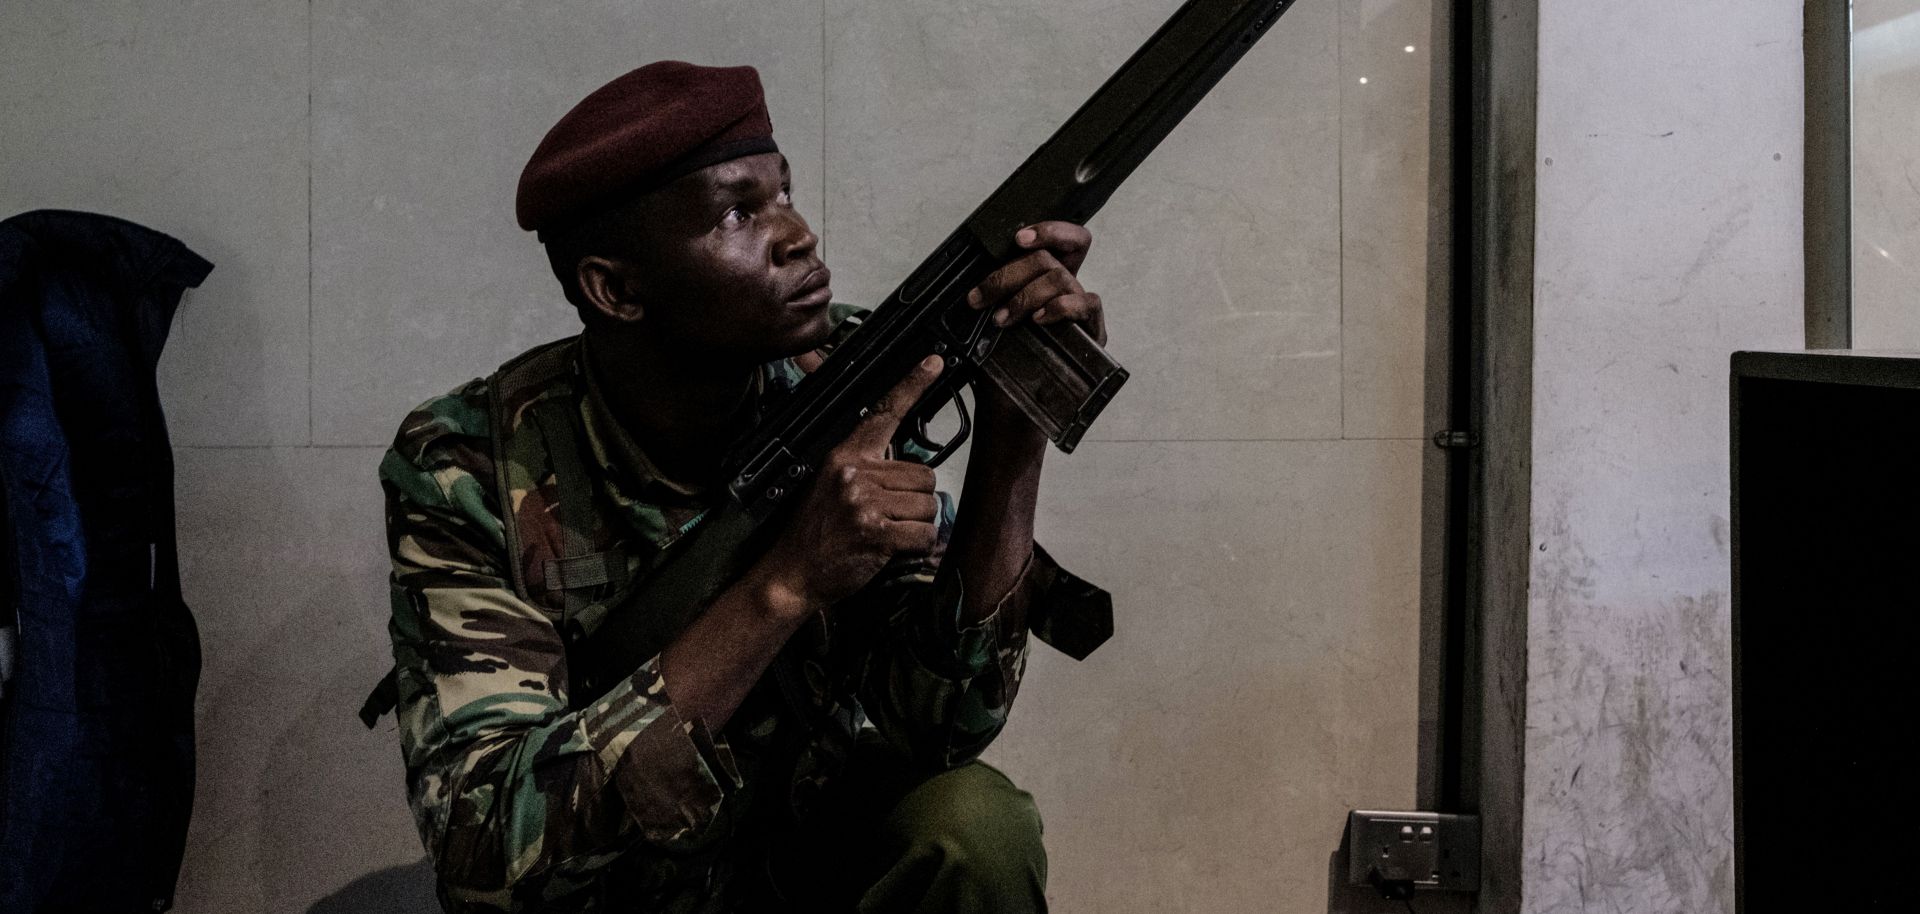 A Kenyan security officer secures a building attached to the Dusit D2 compound in Nairobi after a prolonged gun battle rocked the upmarket hotel complex, Jan. 15. 